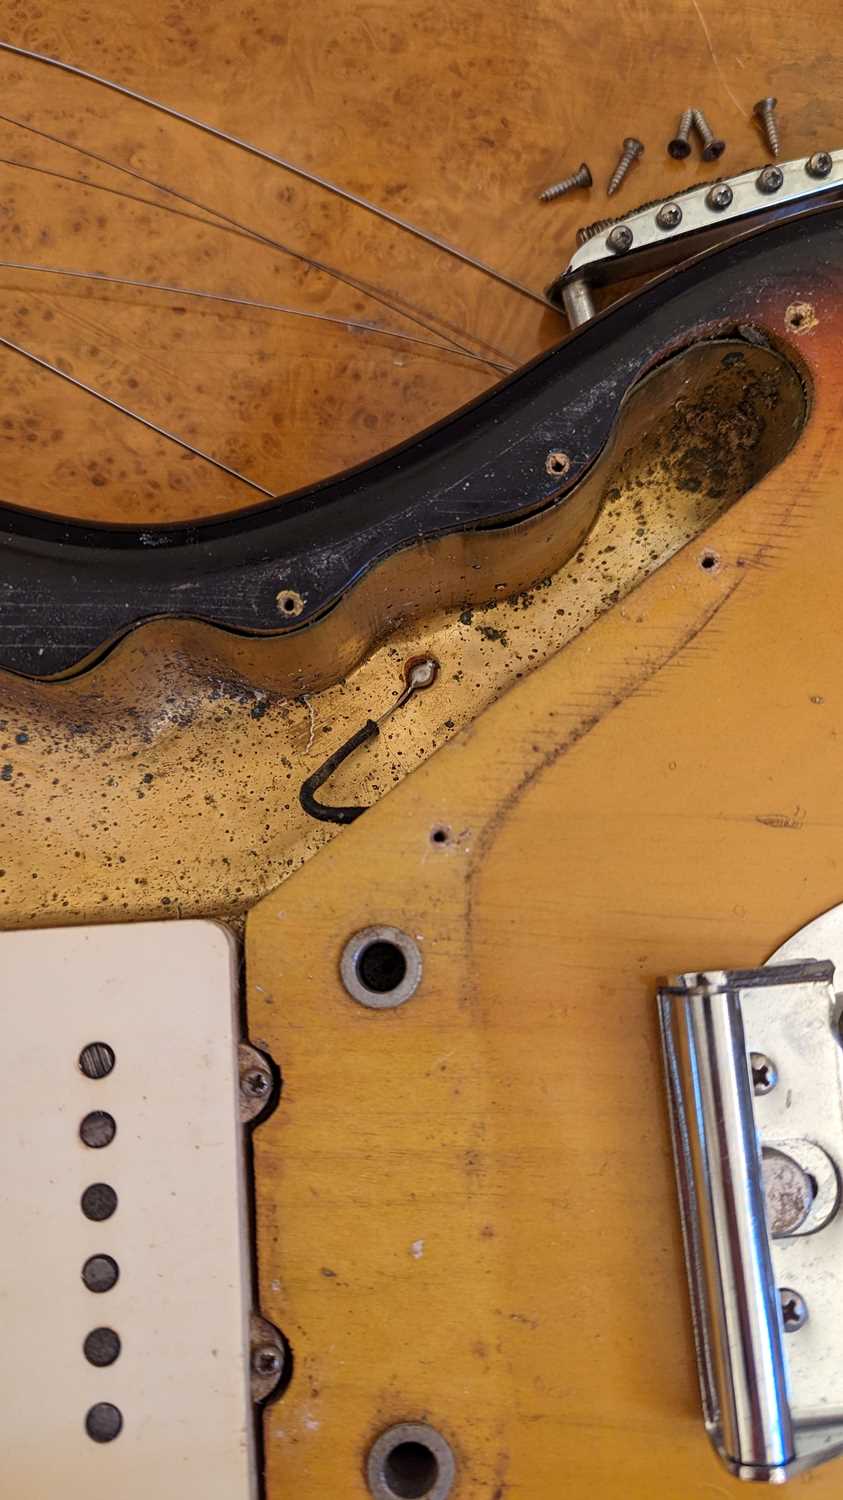 A 1965 Fender Jazzmaster electric guitar, - Image 12 of 16